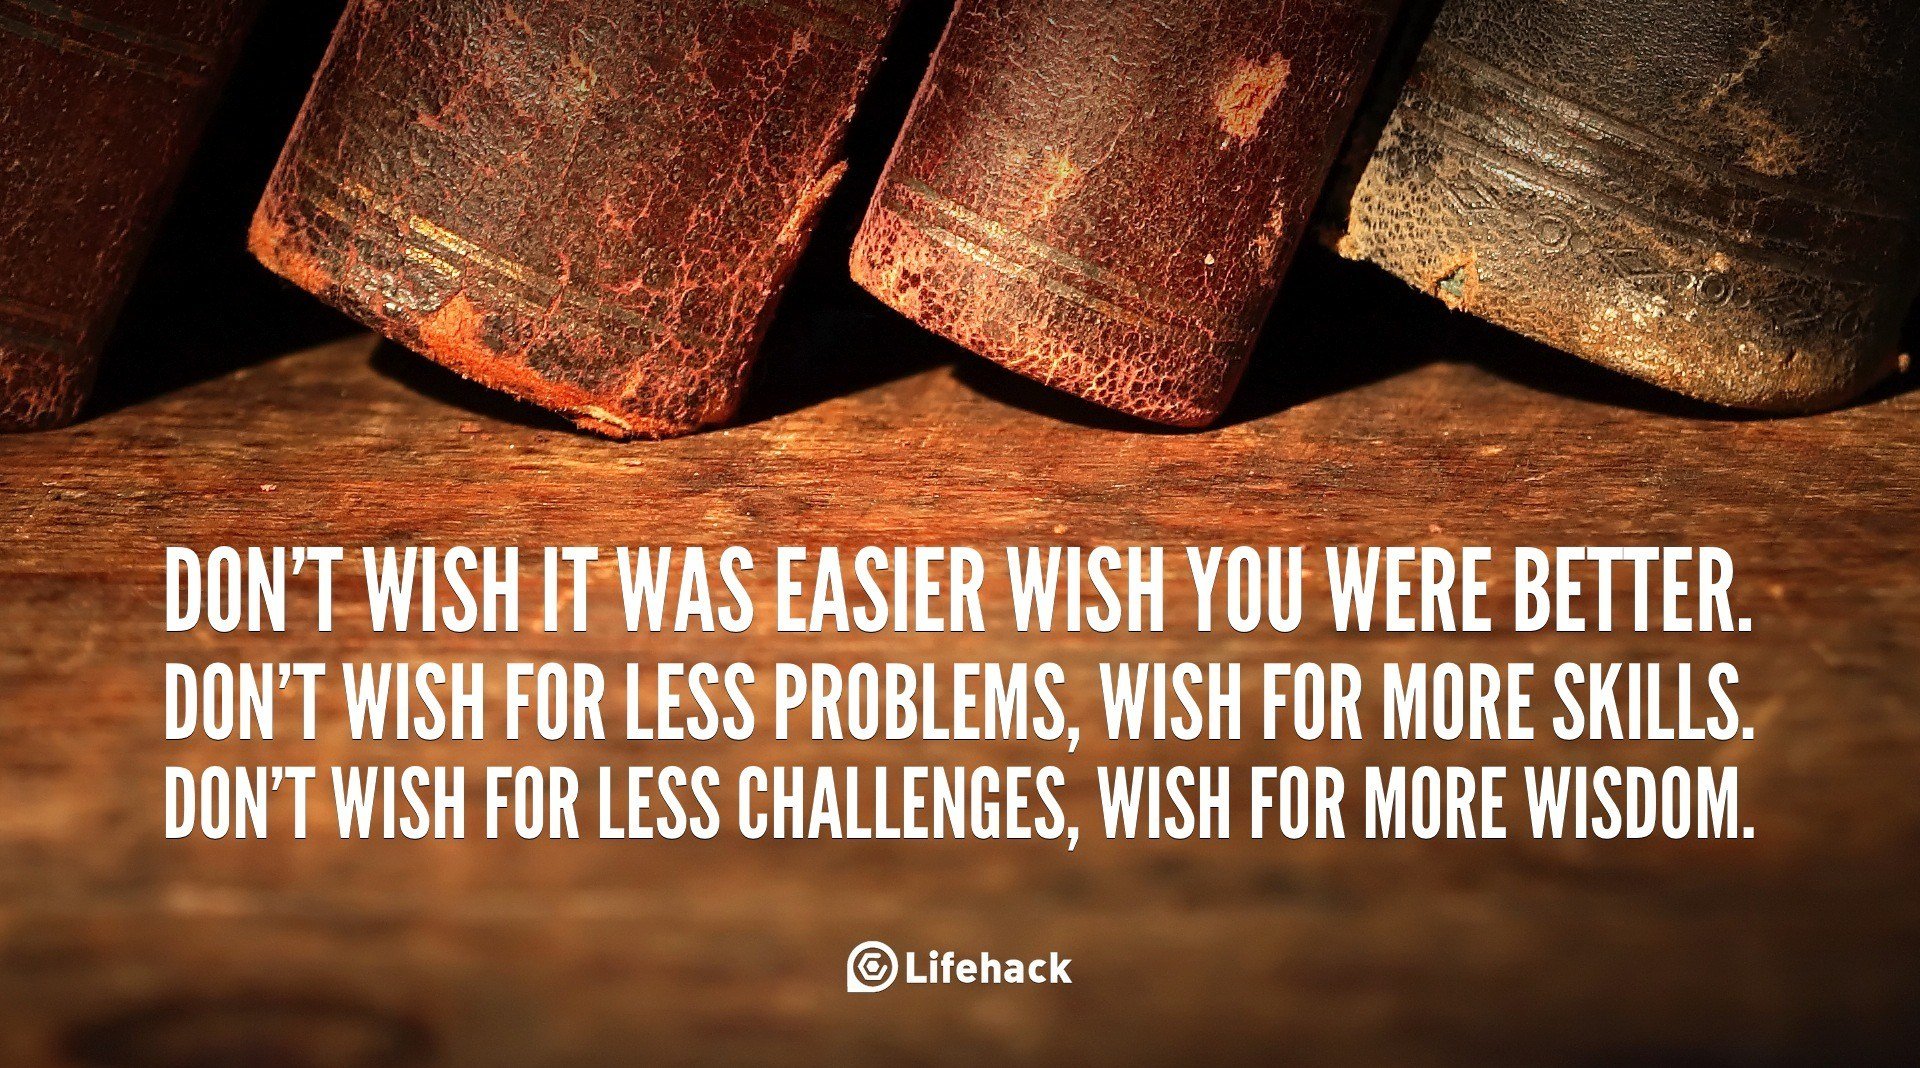 30sec Tip: Don’t Wish it was Easier, Wish You Were Better.